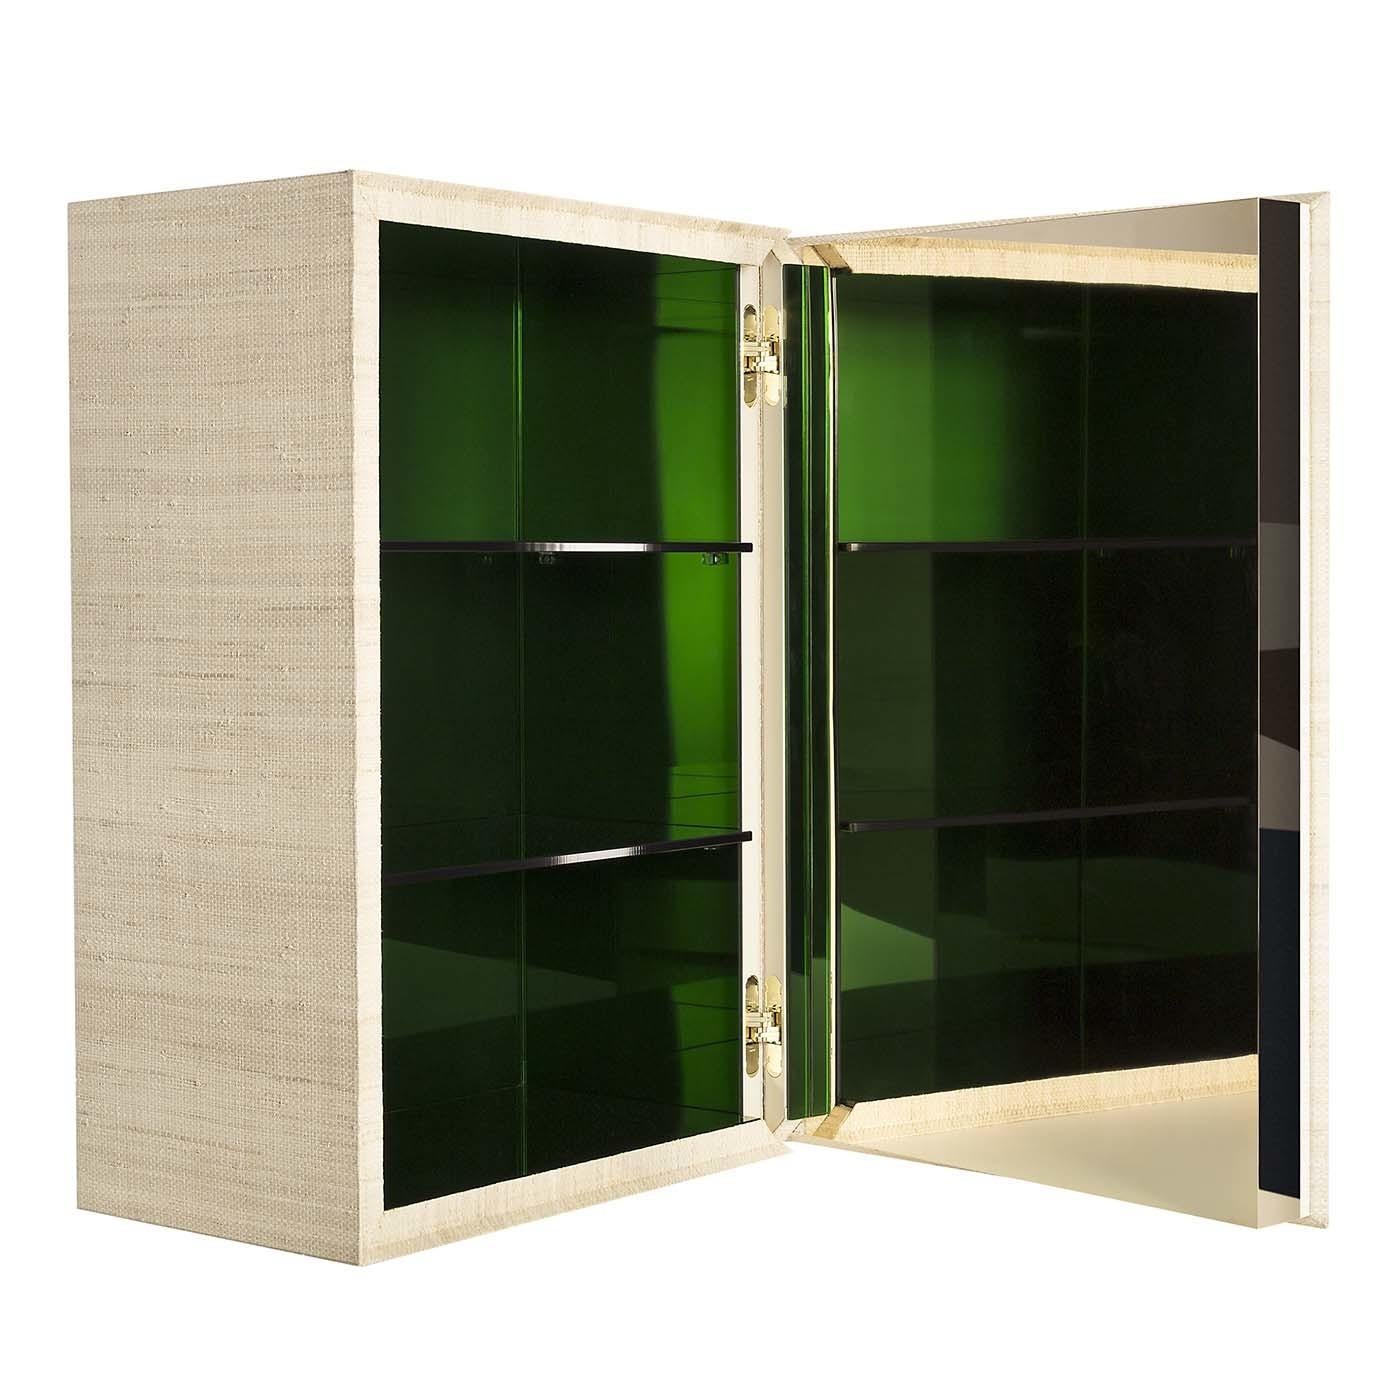 03.03 Collection Green Wall Cabinet